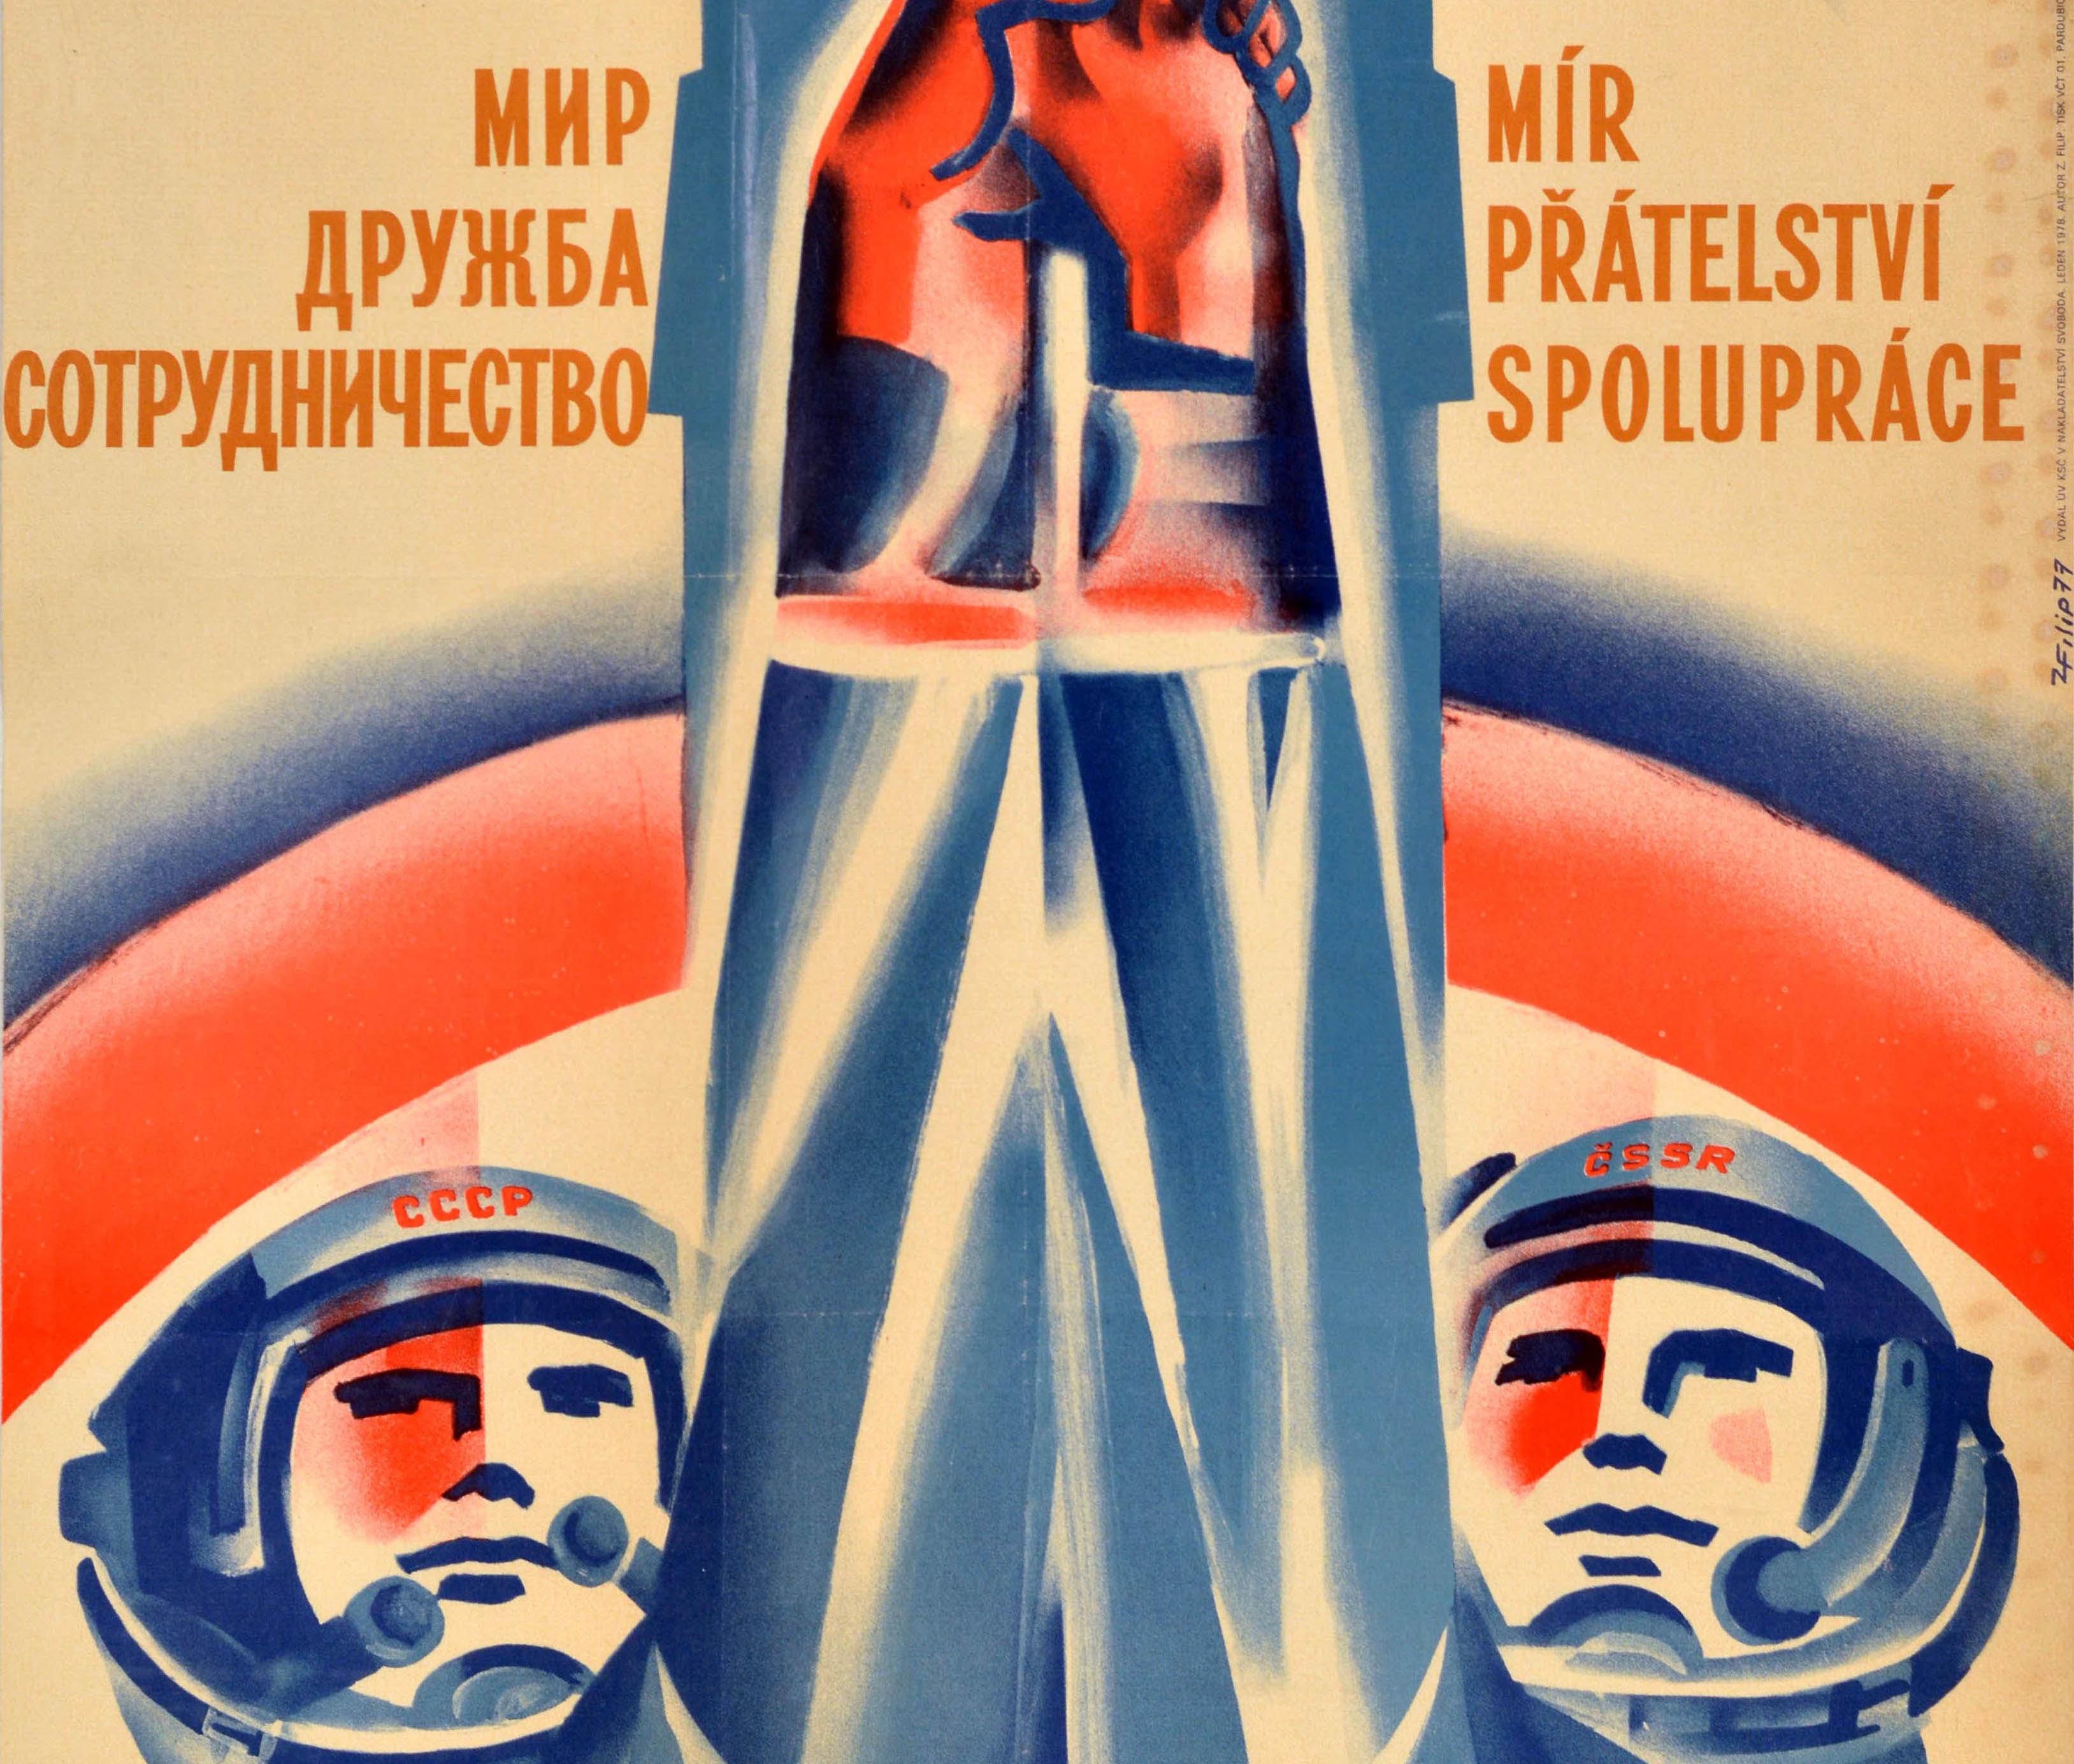 Original vintage Soviet propaganda poster featuring an illustration of two cosmonauts with USSR and Czech SSR on the helmets of their space suits, holding their hands up together against a rocket in the background with the caption in Russian and